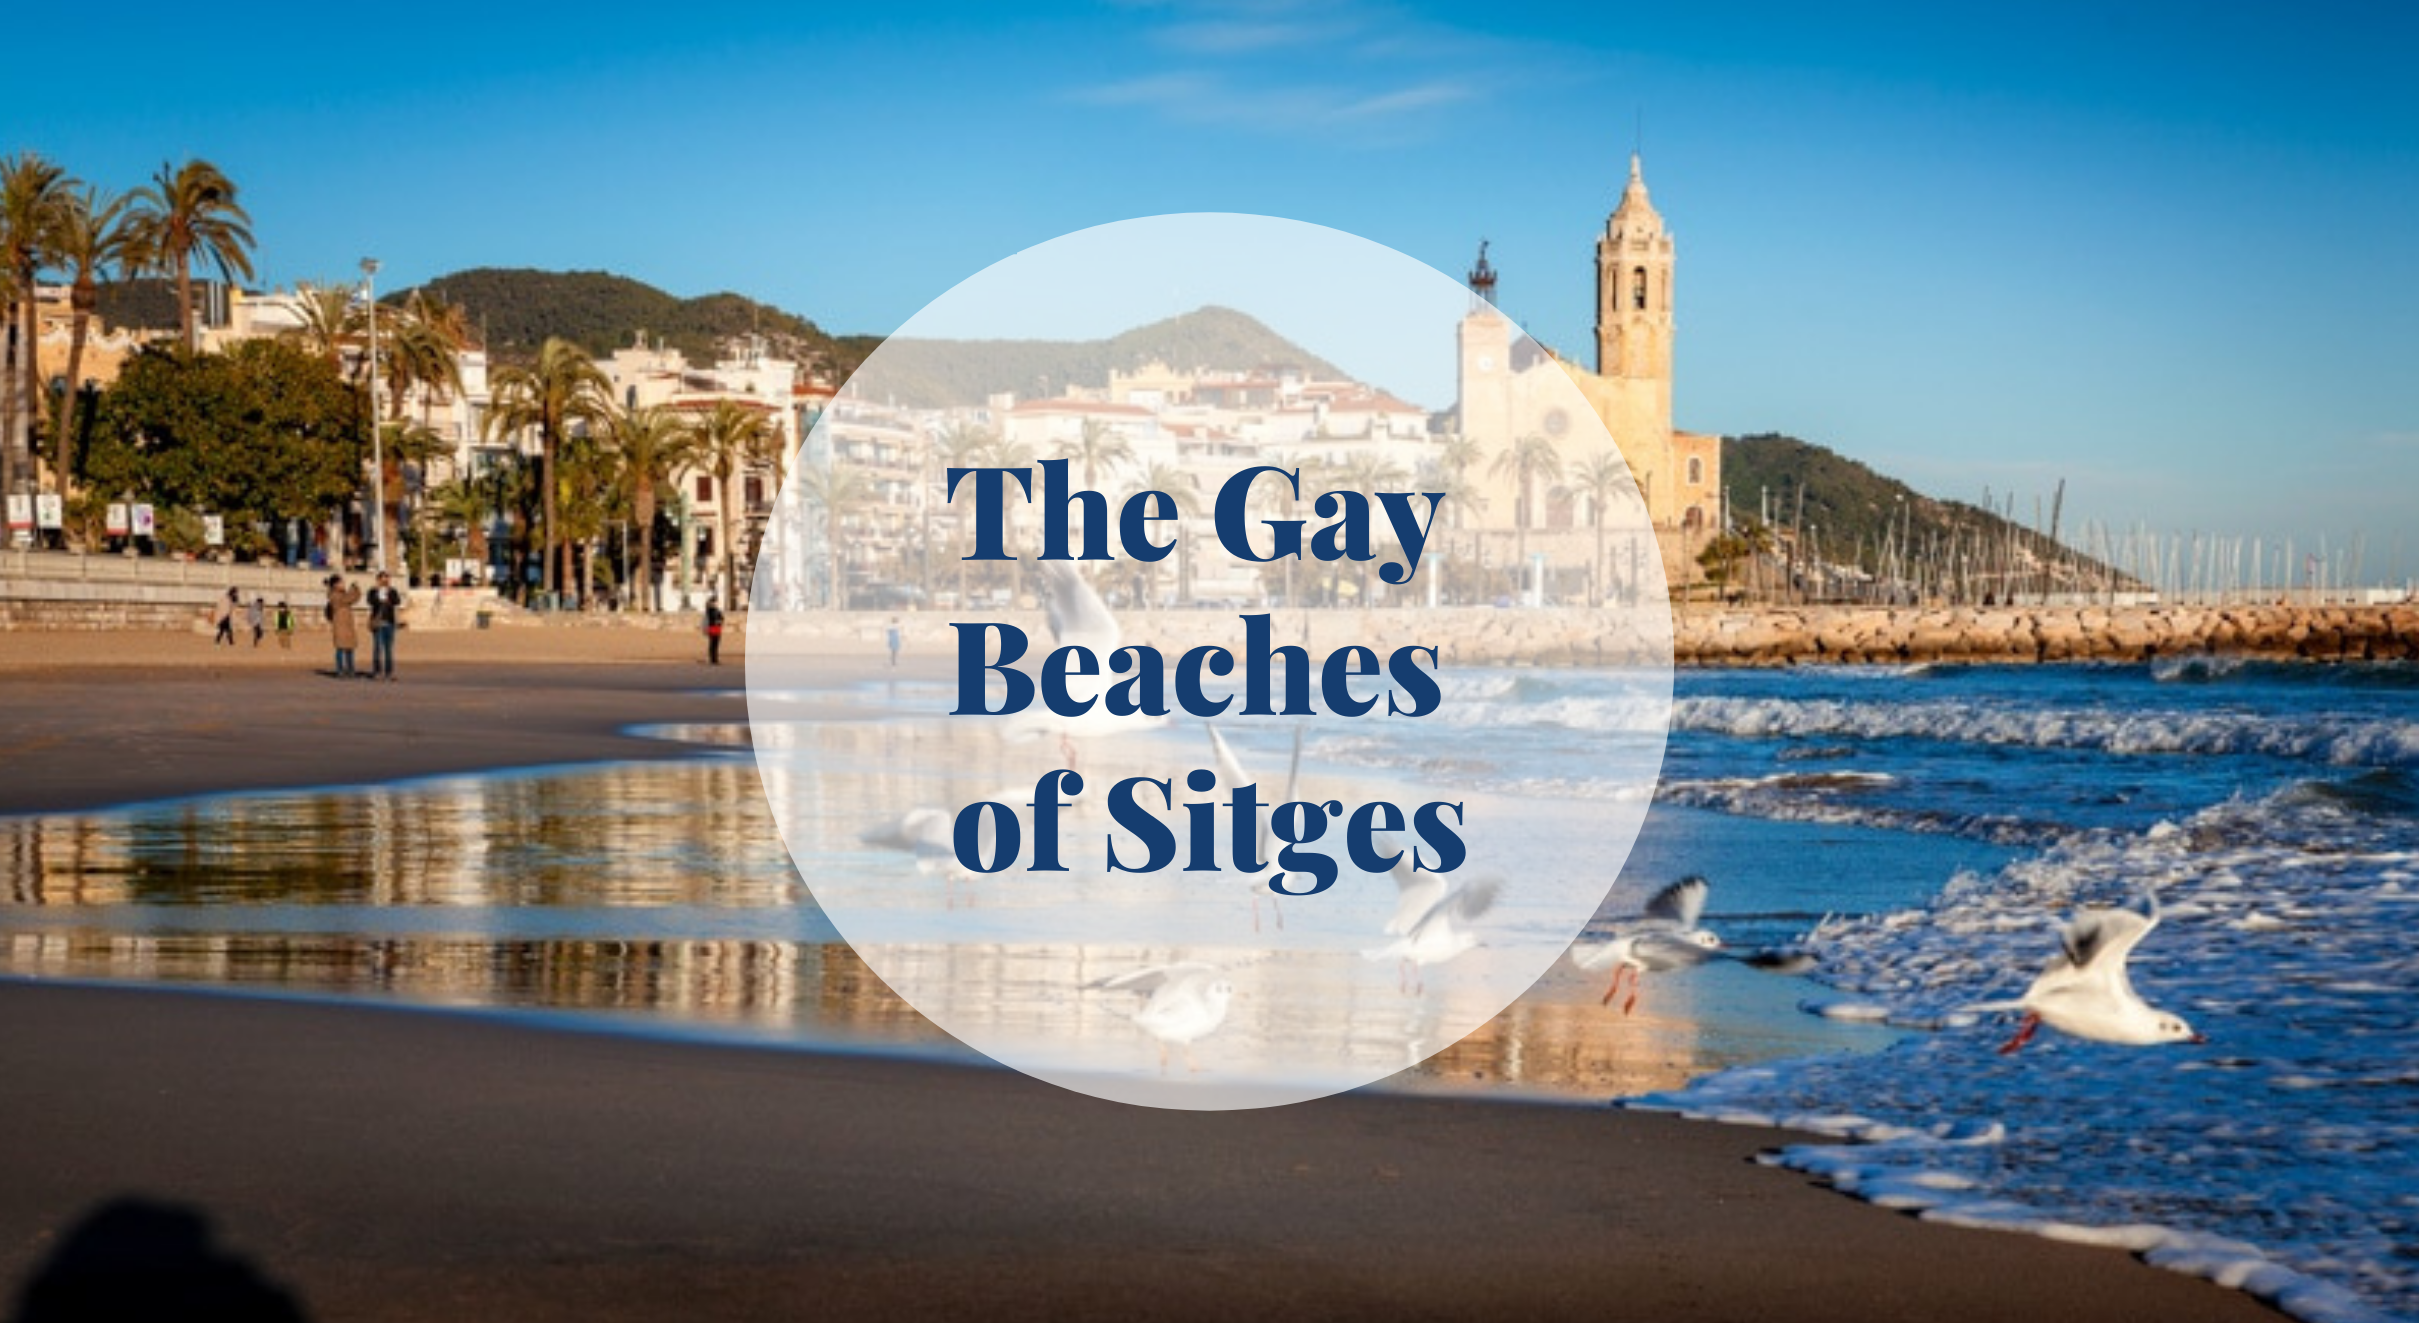 Lets discover the Gay Beaches of Sitges picture image